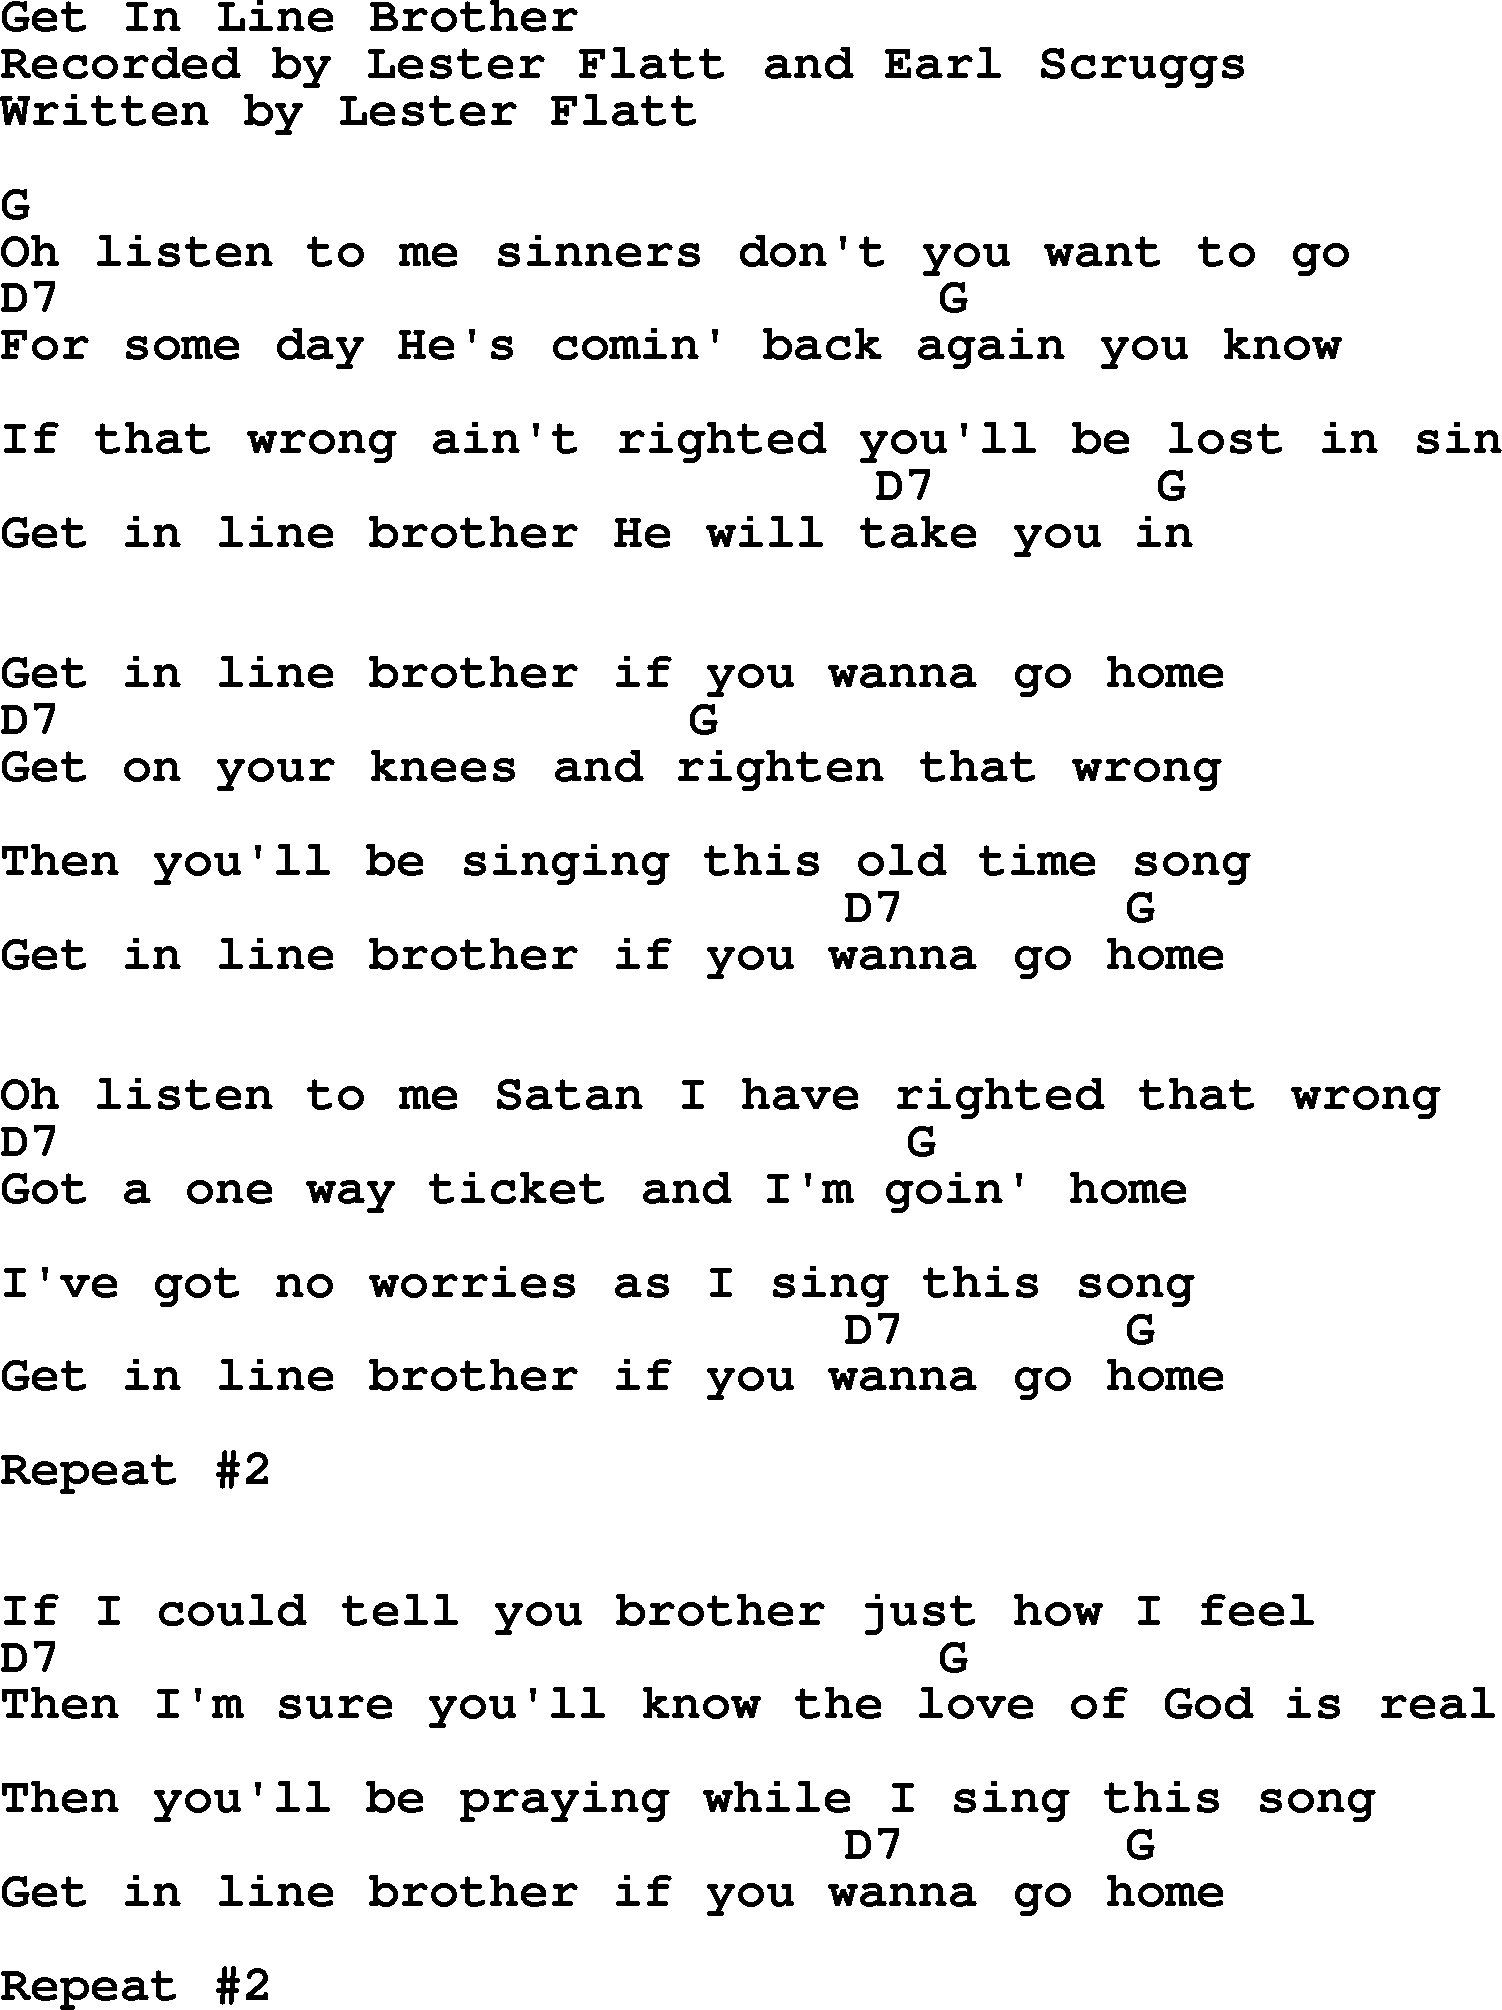 Bluegrass song: Get In Line Brother, lyrics and chords